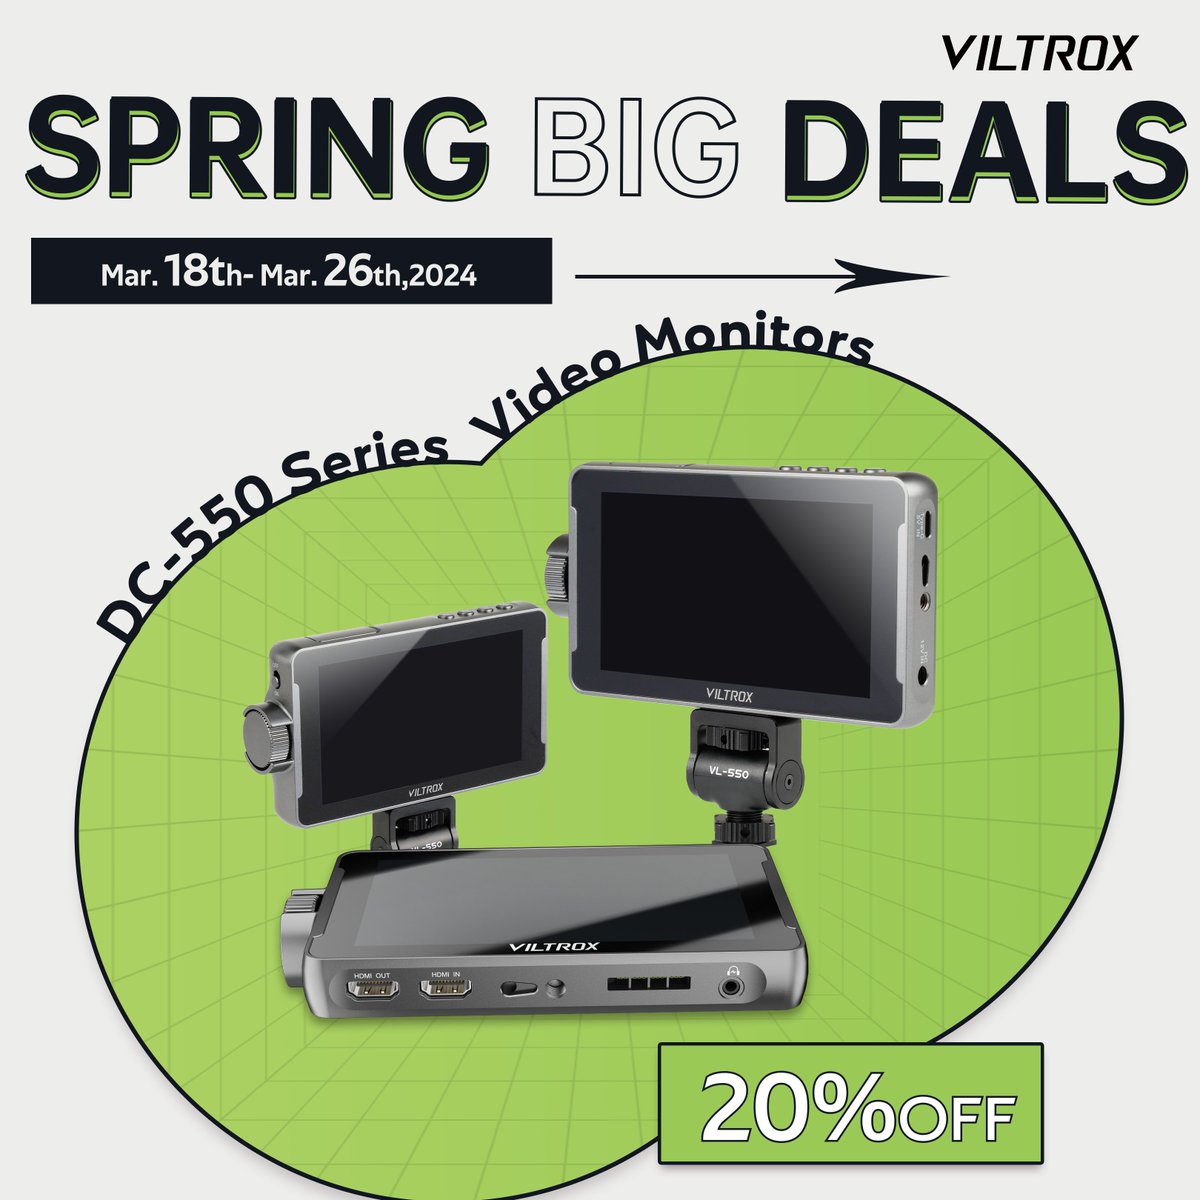 Viltrox Spring Big Deals. 【20%OFF 】discount of DC-550 series video monitors. 📷: Purchase from Viltrox Store： viltroxstore.com/.../viltrox-5-… #viltrox #viltroxmonitor #viltroxdc550 #viltroxdc550pro #viltroxdc550lite #monitor #videomonitor #springsale #bigdealsale #cameramonitor